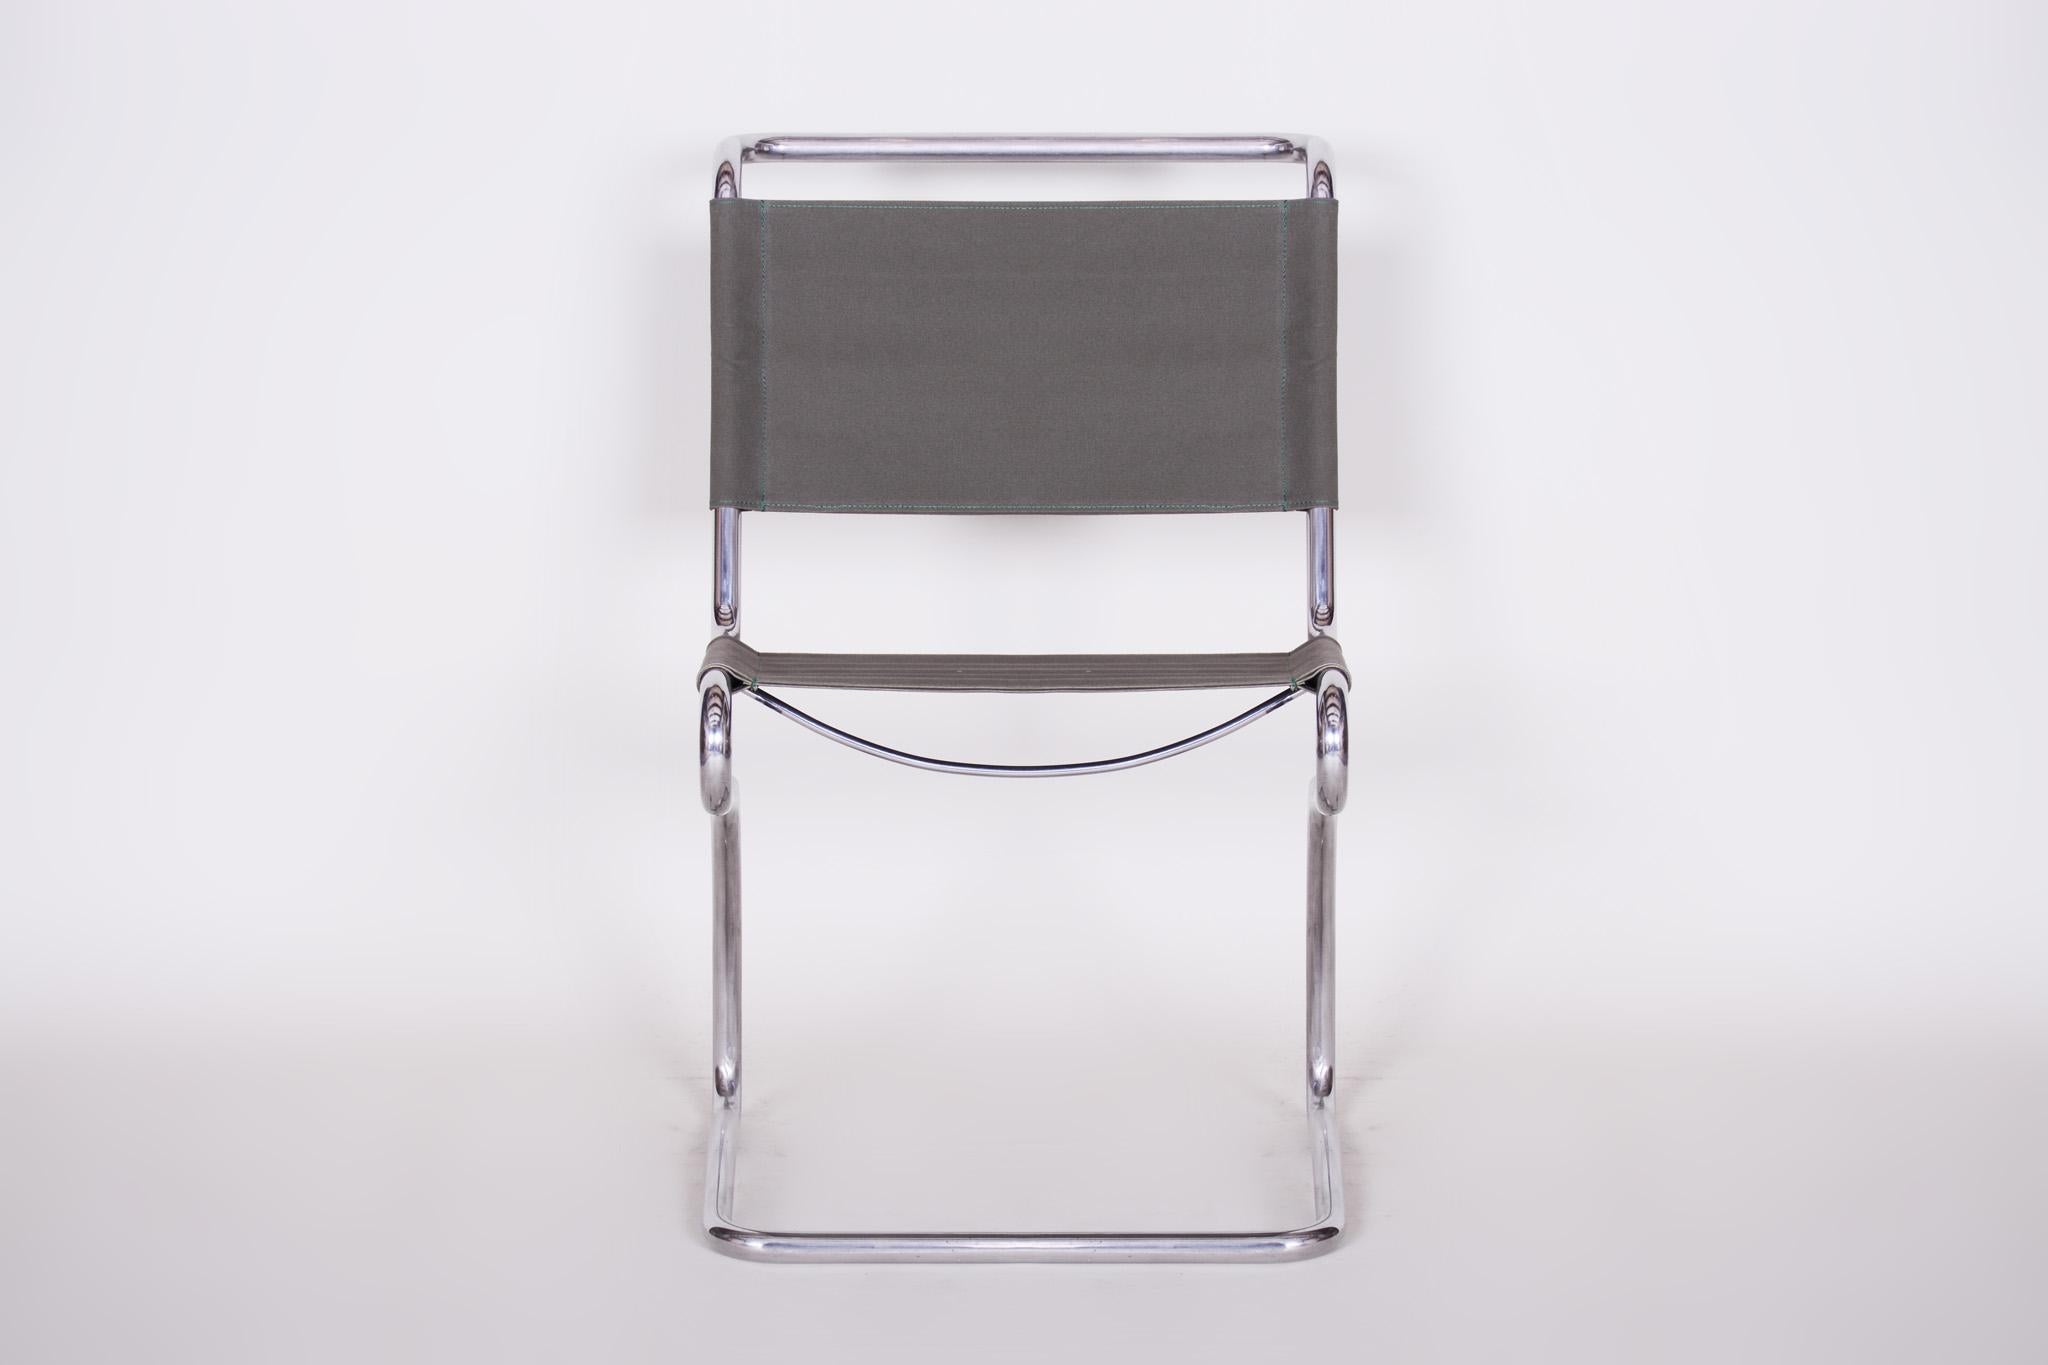 Restored Bauhaus Chair Deisgned By Jindrich Halabala.

Designer: Jindrich Halabala
Maker: UP Zavody
Material: Chrome-plated Steel, Fabric
Source: Czechia (Czechoslovakia)
Period: 1930-1939
Model: H79

The chrome parts have been professionally